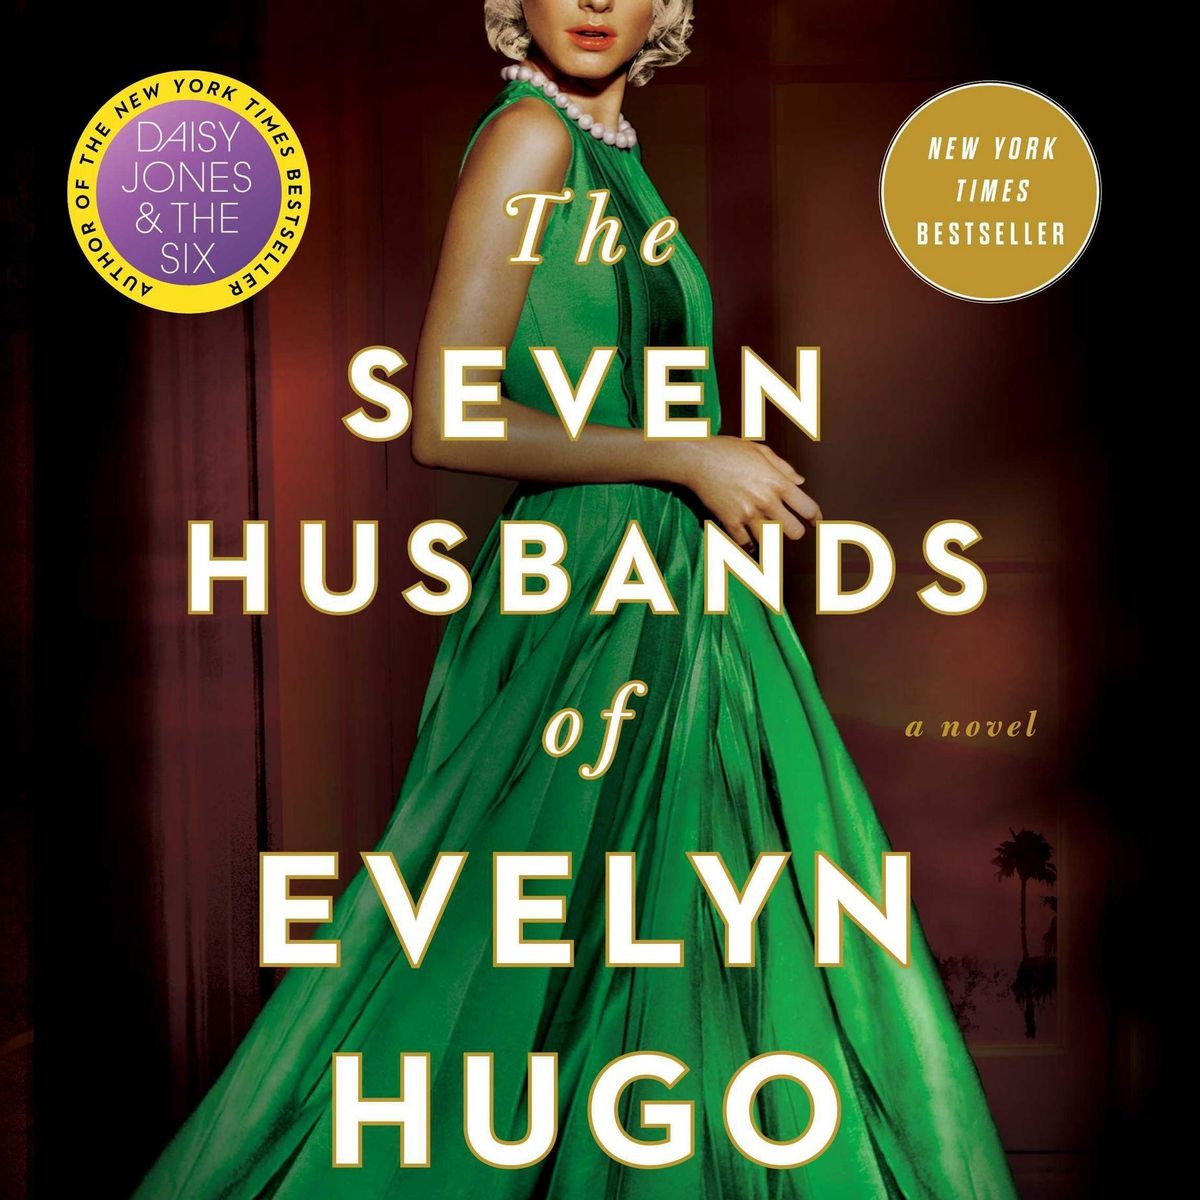 book review on the seven husbands of evelyn hugo